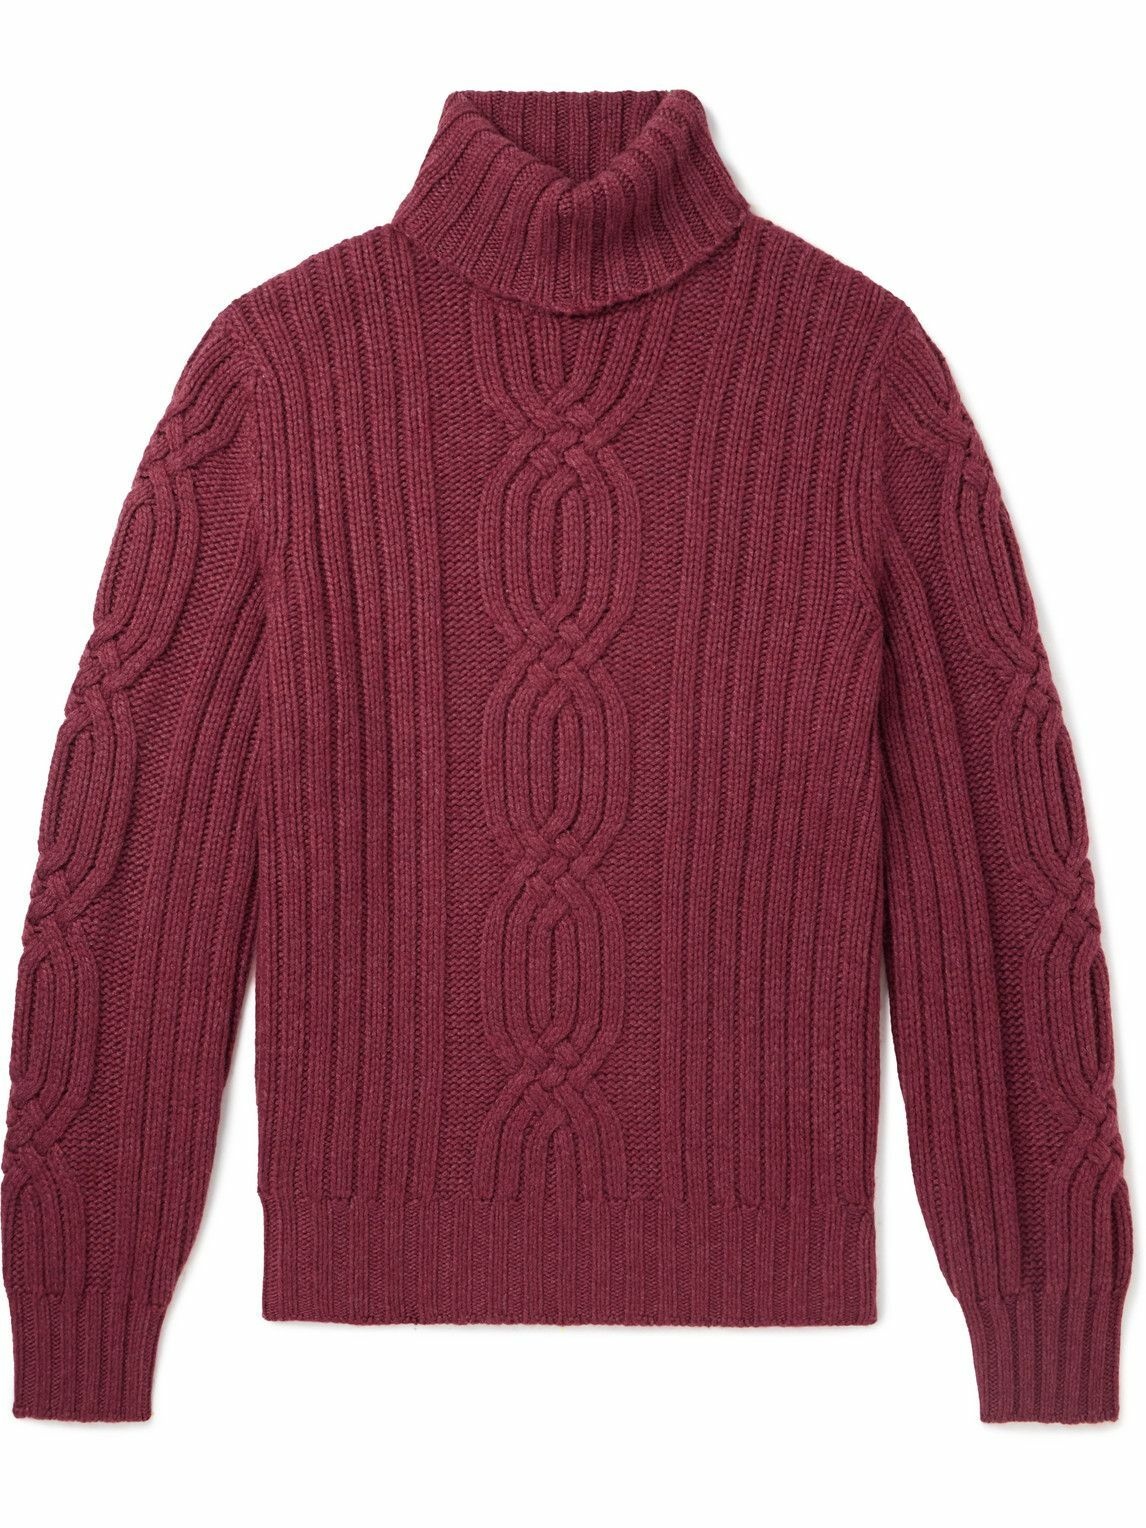 Photo: Brunello Cucinelli - Slim-Fit Cable-Knit Cashmere Rollneck Sweater - Red